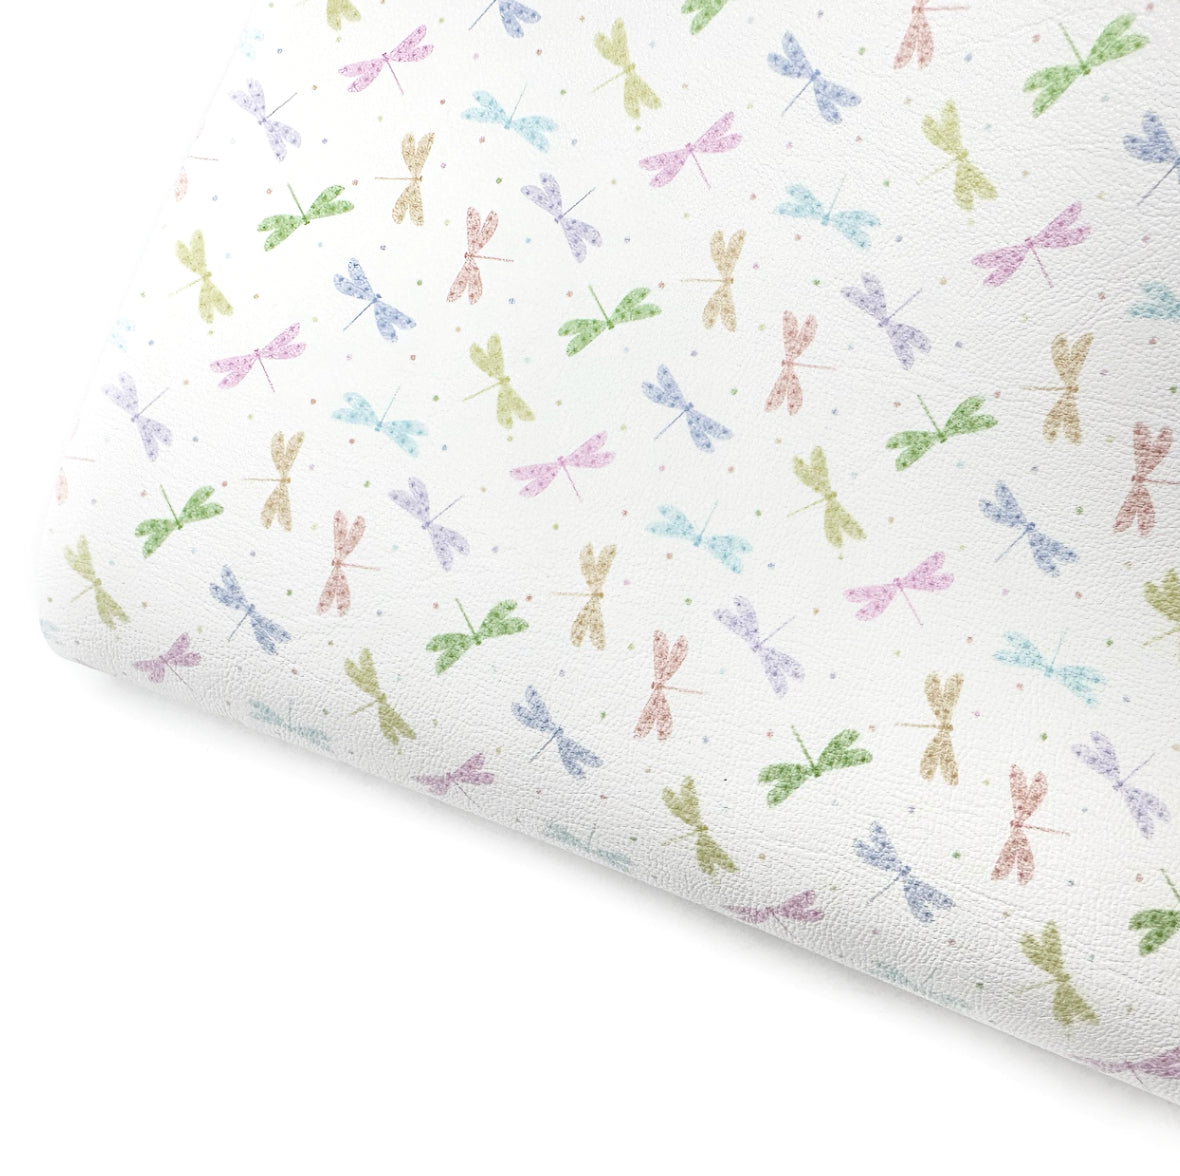 Rainbow Dragonflies Premium Faux Leather Fabric Sheets